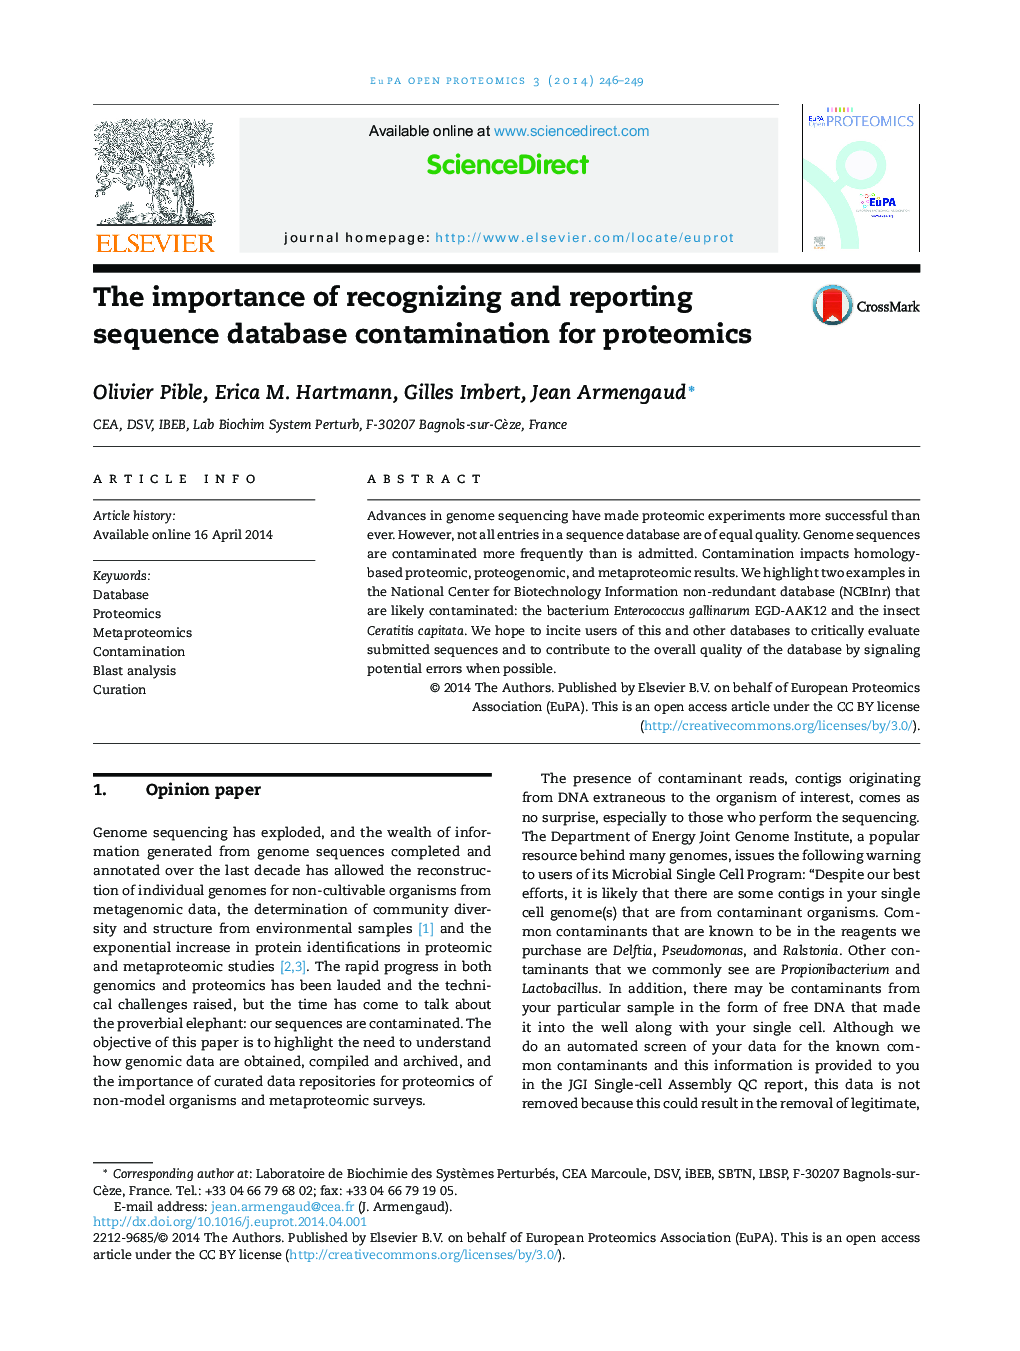 The importance of recognizing and reporting sequence database contamination for proteomics 